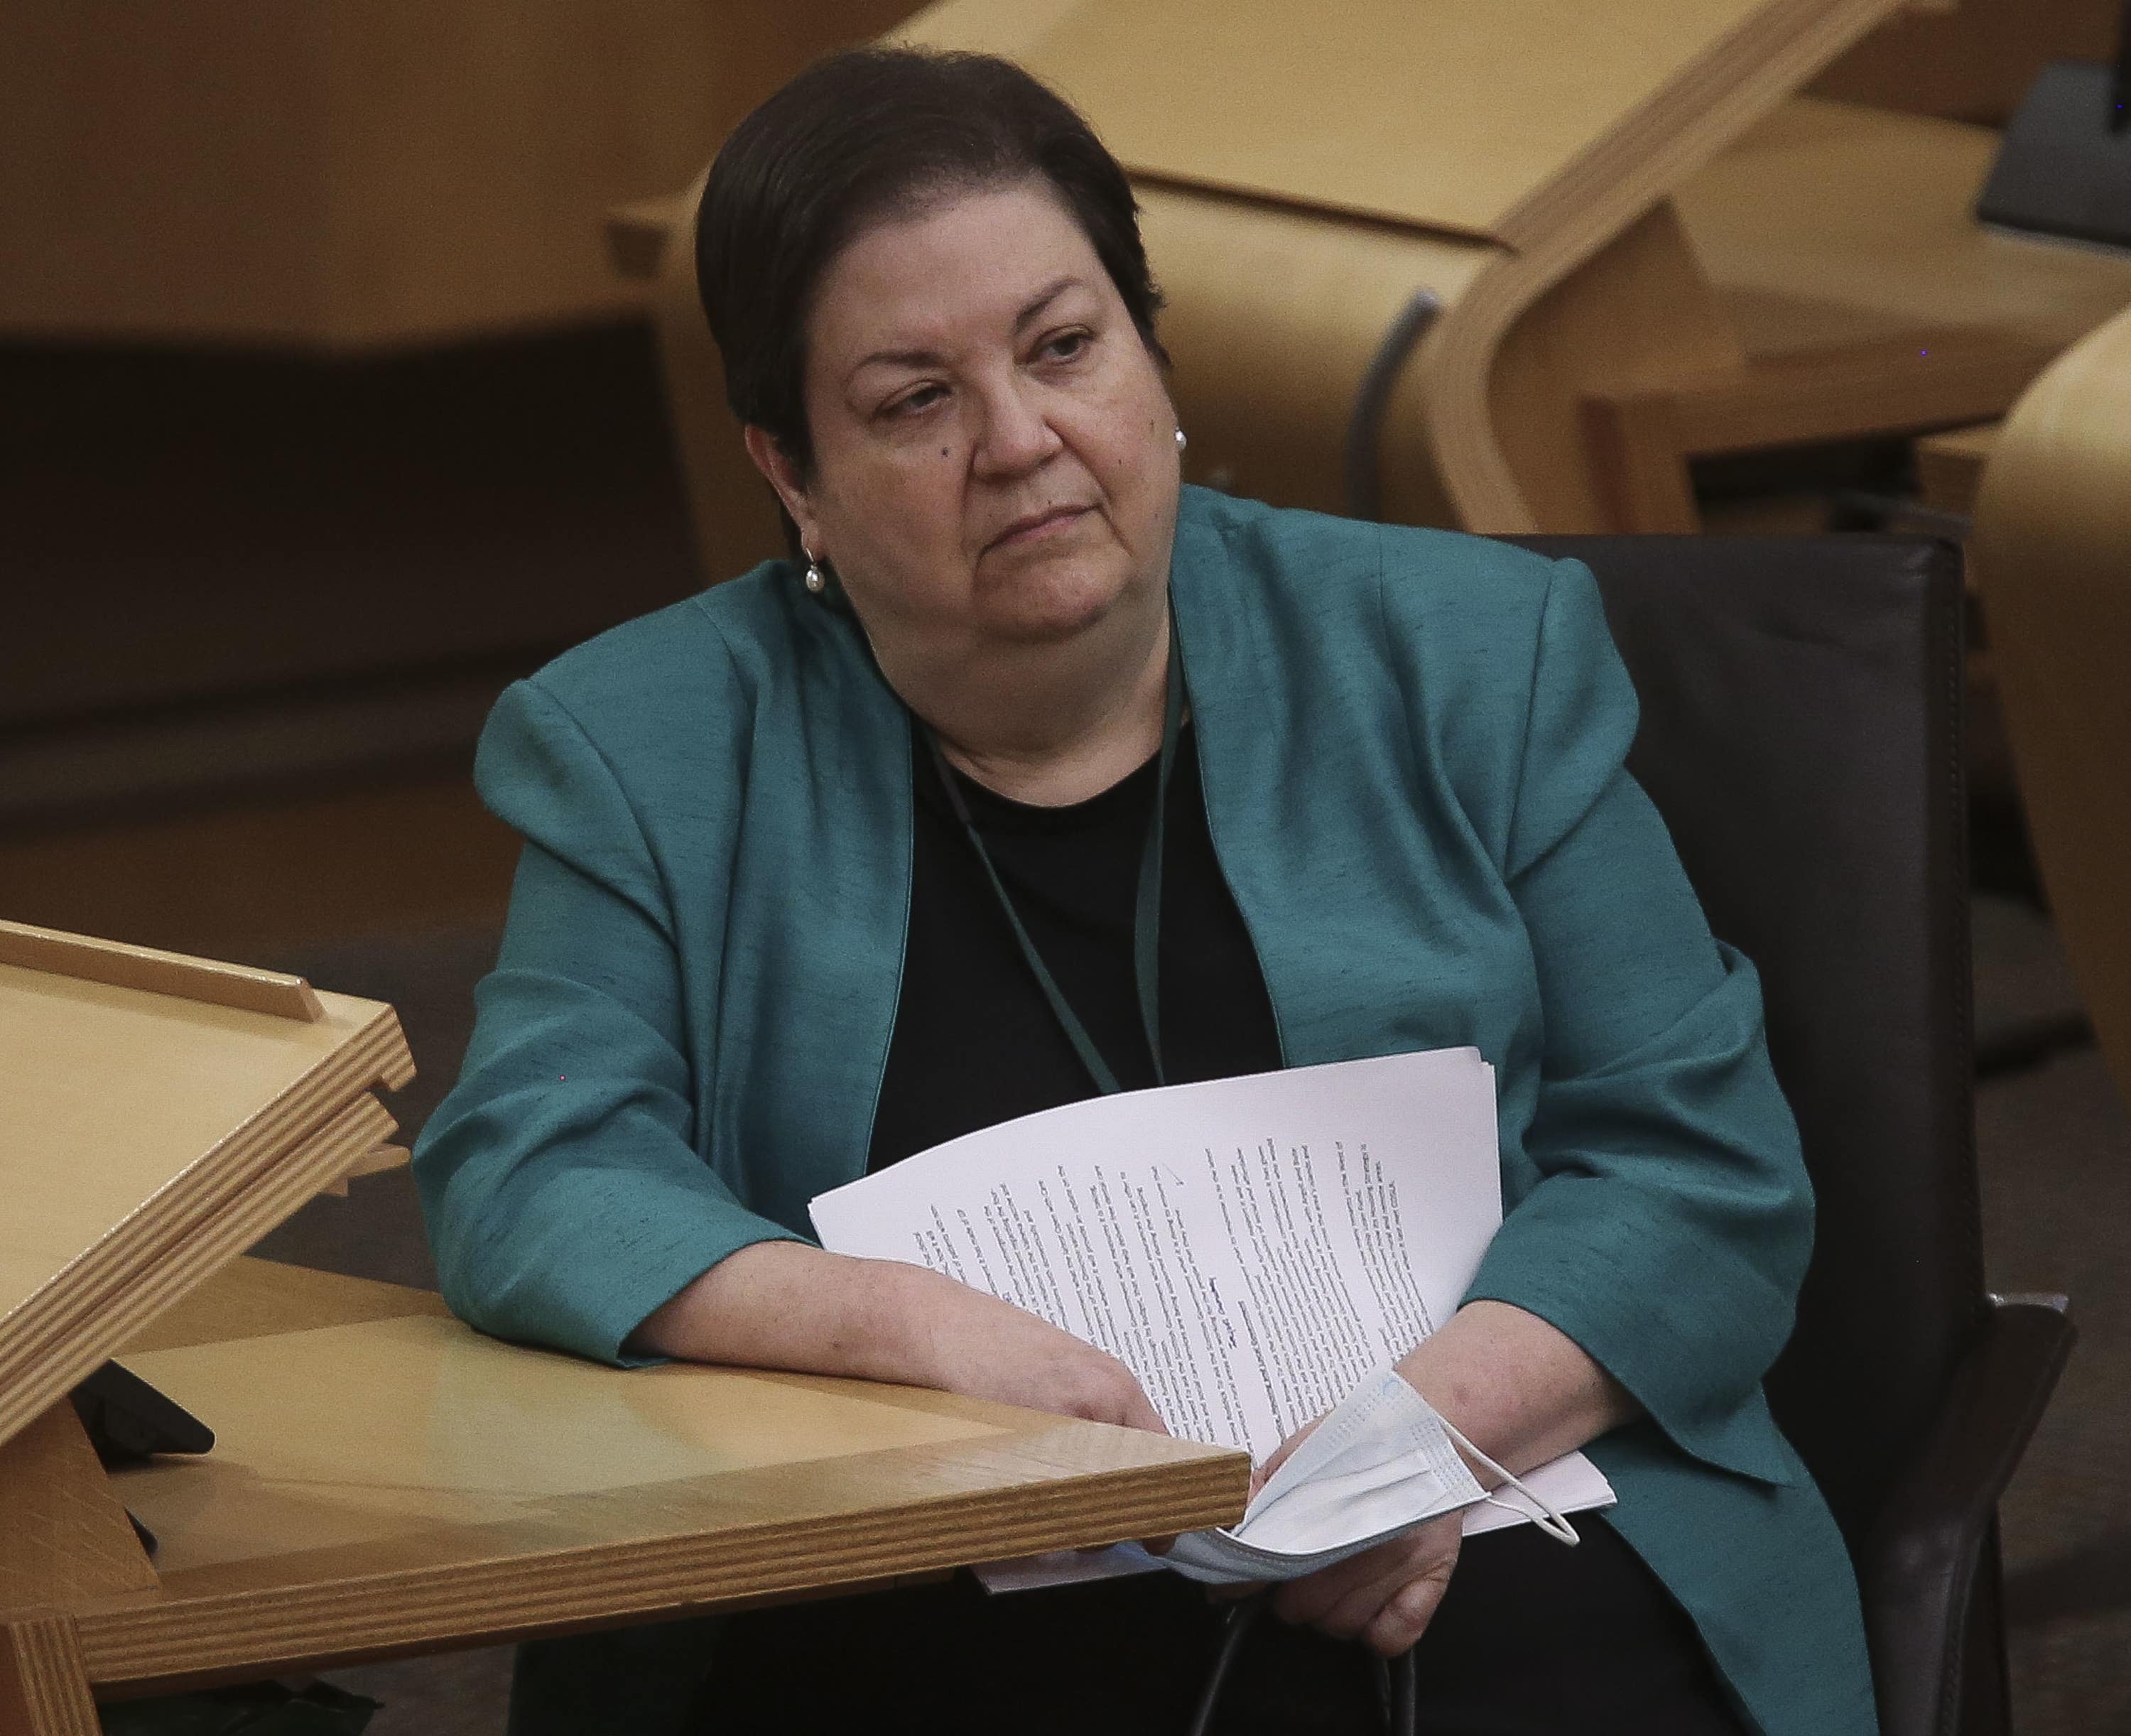 Jackie Baillie said ministers have failed to heed warnings from the Royal College of Radiologists about soaring outsourcing costs amid staff shortages.